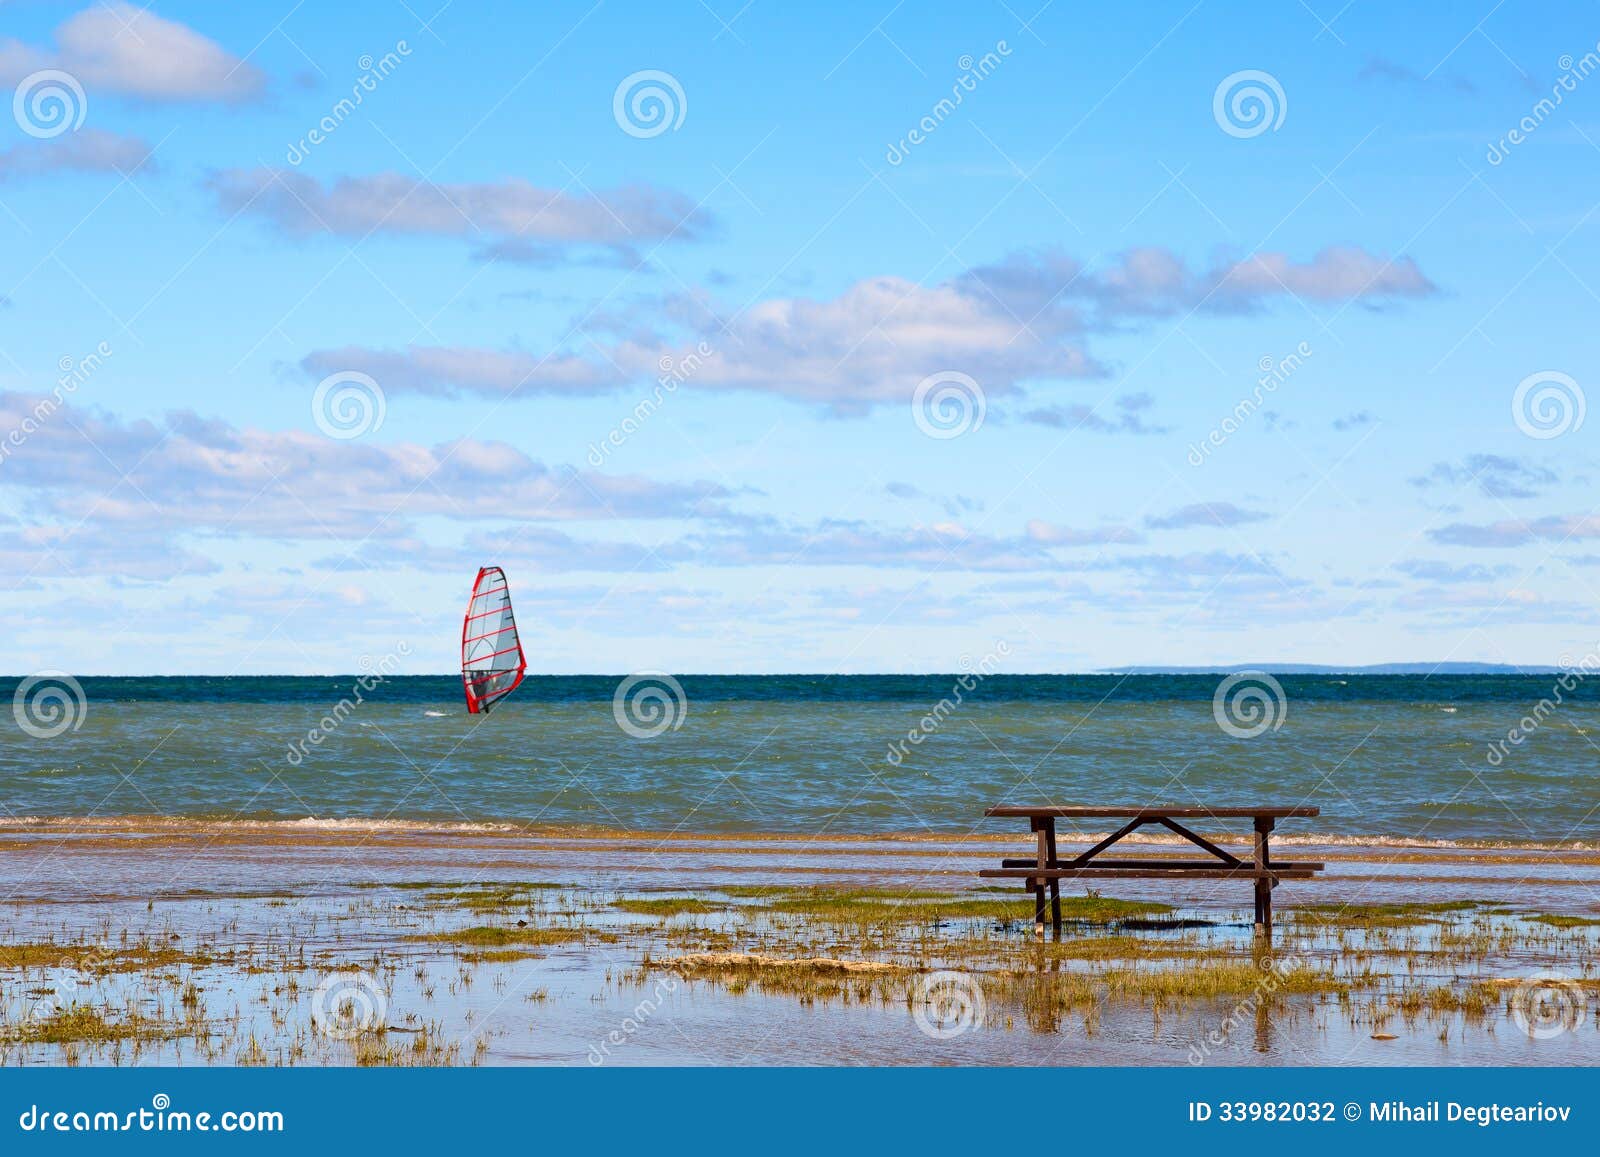 Picnic table on a lake shore with legs slightly flooded by shallow 